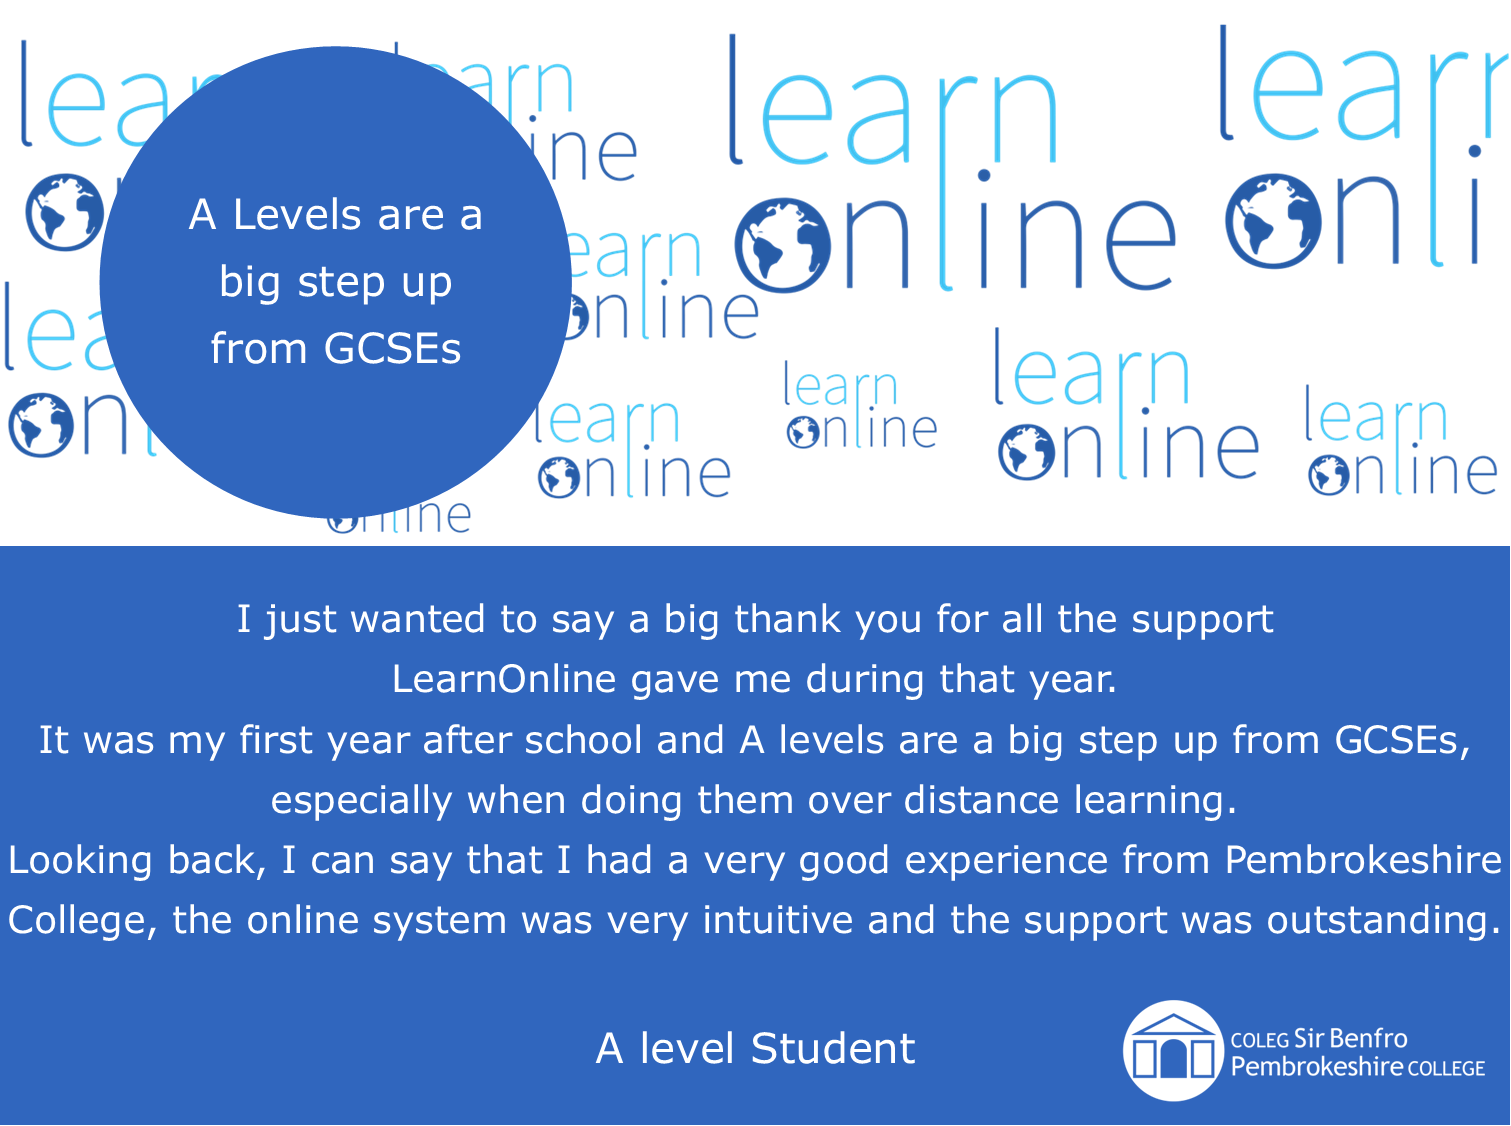 LearnOnline testimonial 'A Levels are a big step up from GCSEs' I just wanted to say a big thank you for all the support LearnOnline gave me during that year. It was my first year after school and A levels are a big step up from GCSEs, especially when doing them over distance learning. Looking back, I can say that I had a very good experience from Pembrokeshire College, the online system was very intuitive and the support was outstanding. A level learner